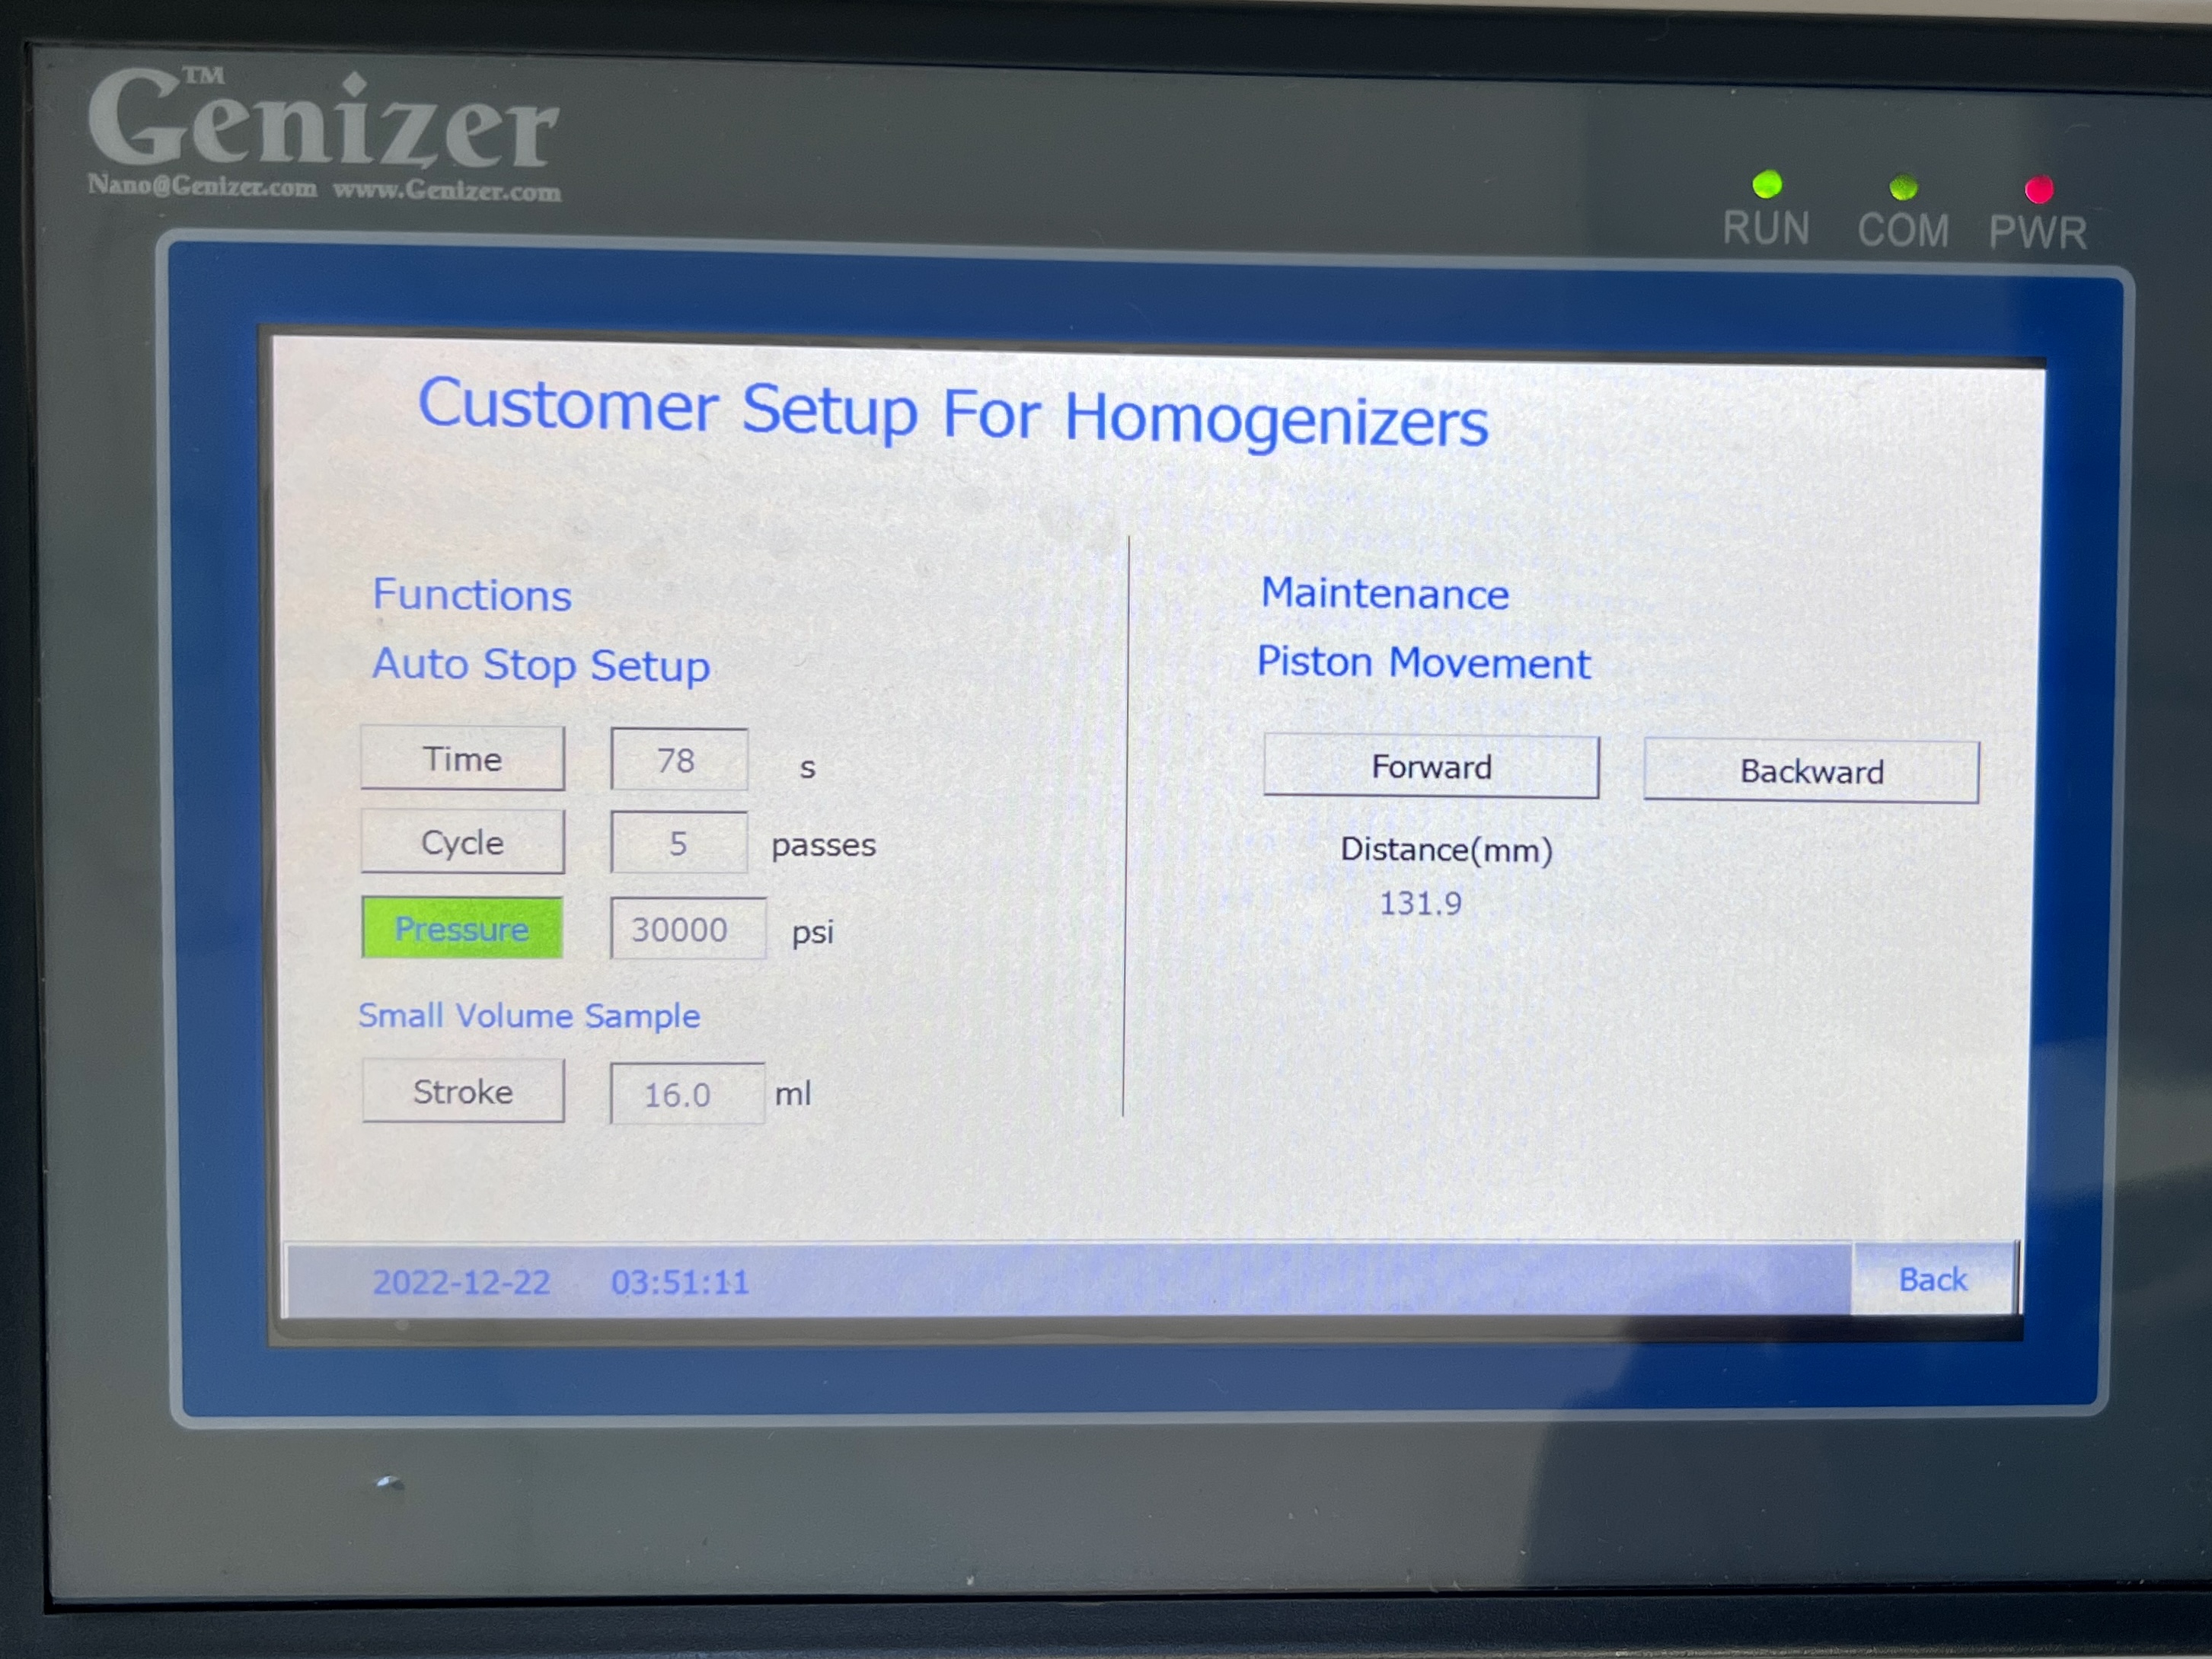 Photo showing customer settings on PLC Touch Screen for high pressure homogenizers.